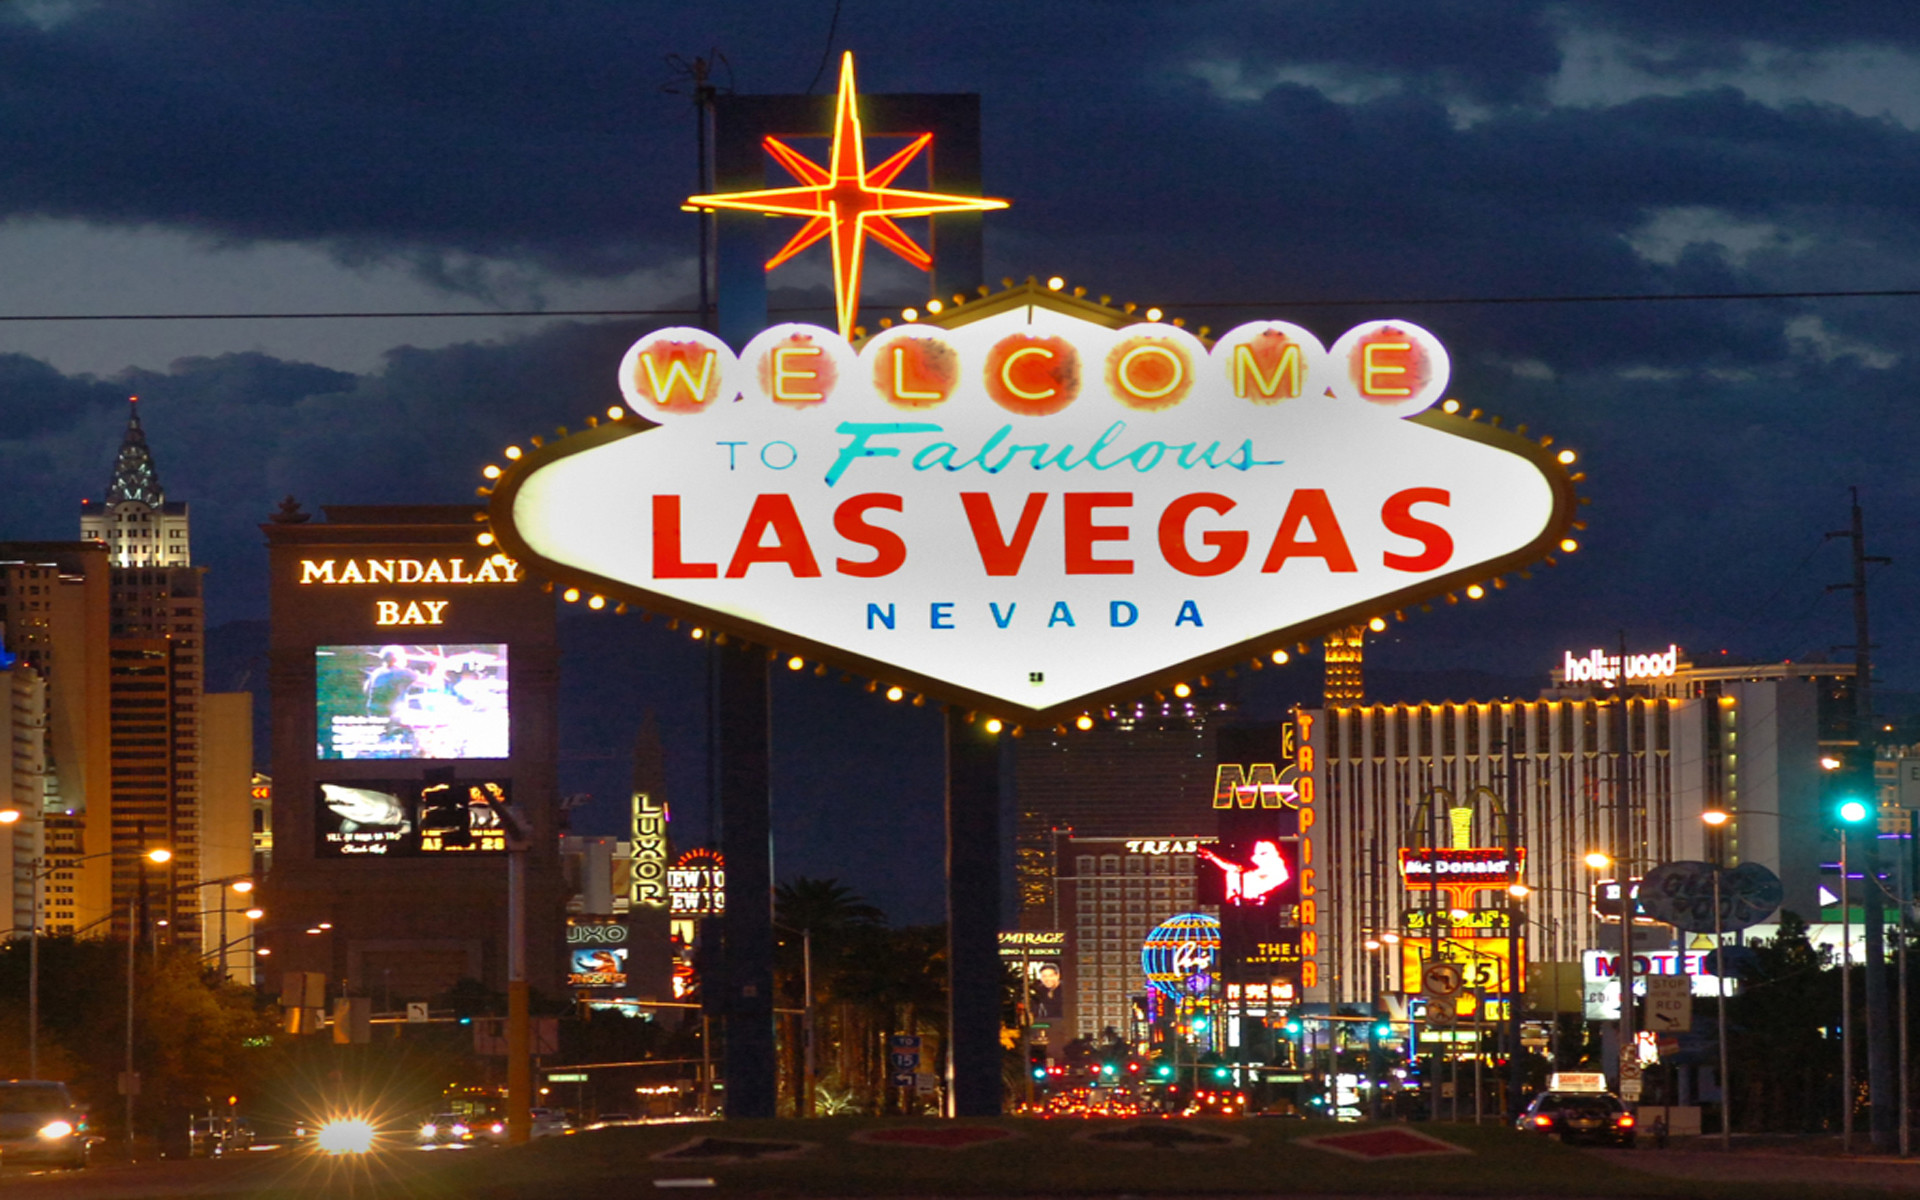 Las Vegas City Night Image Hd Background Wallpapers - Welcome To Las Vegas Sign - HD Wallpaper 